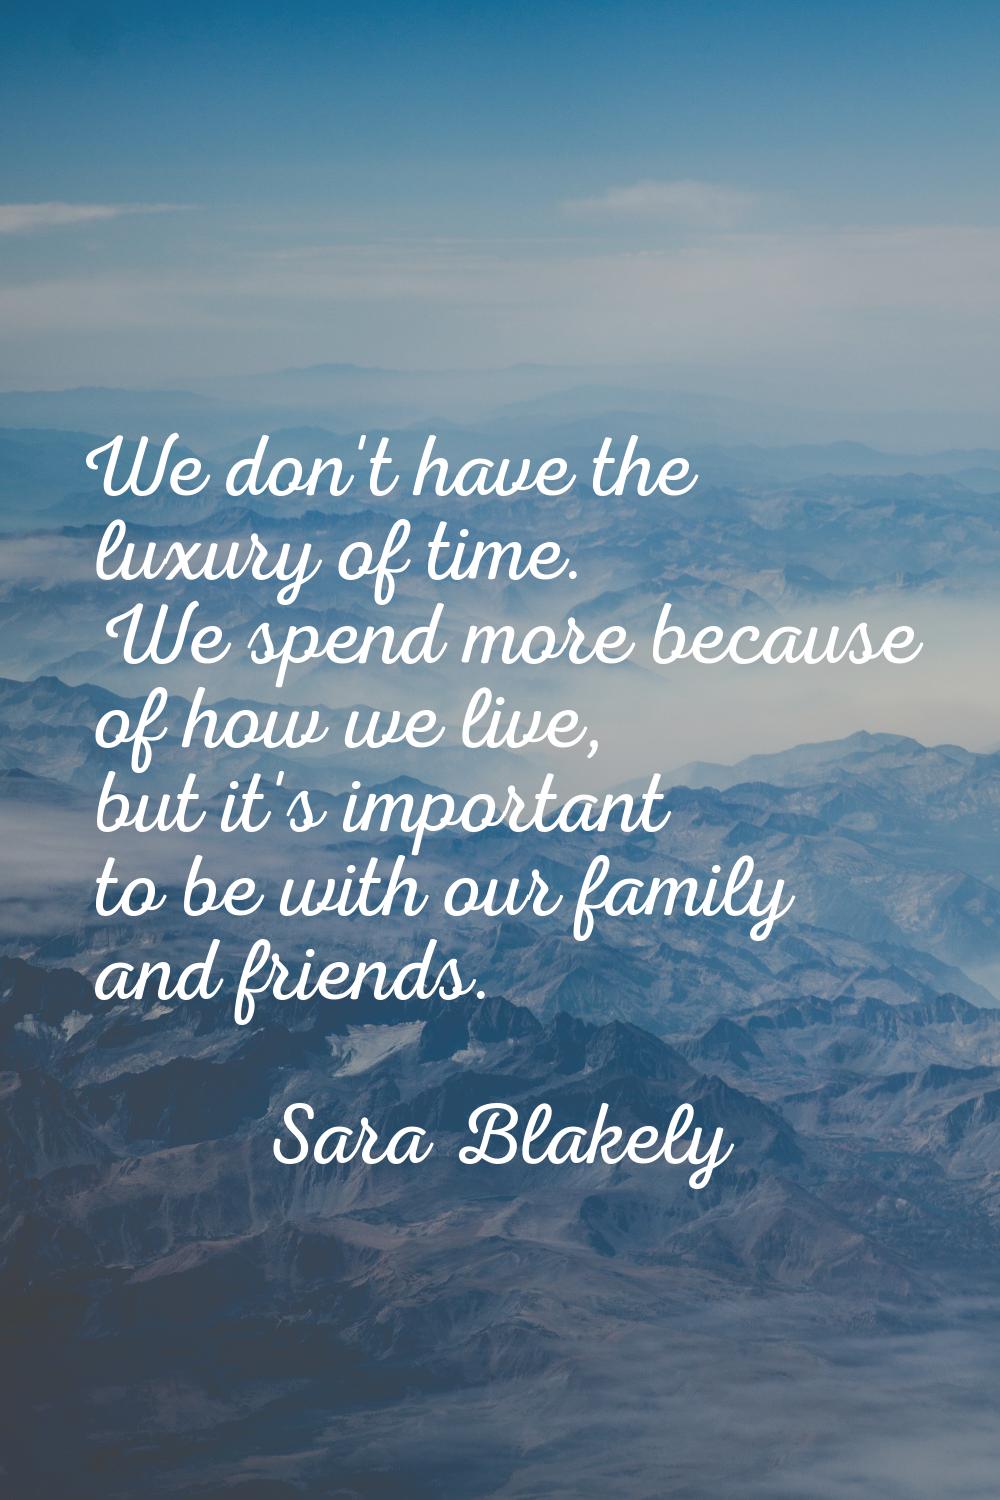 We don't have the luxury of time. We spend more because of how we live, but it's important to be wi